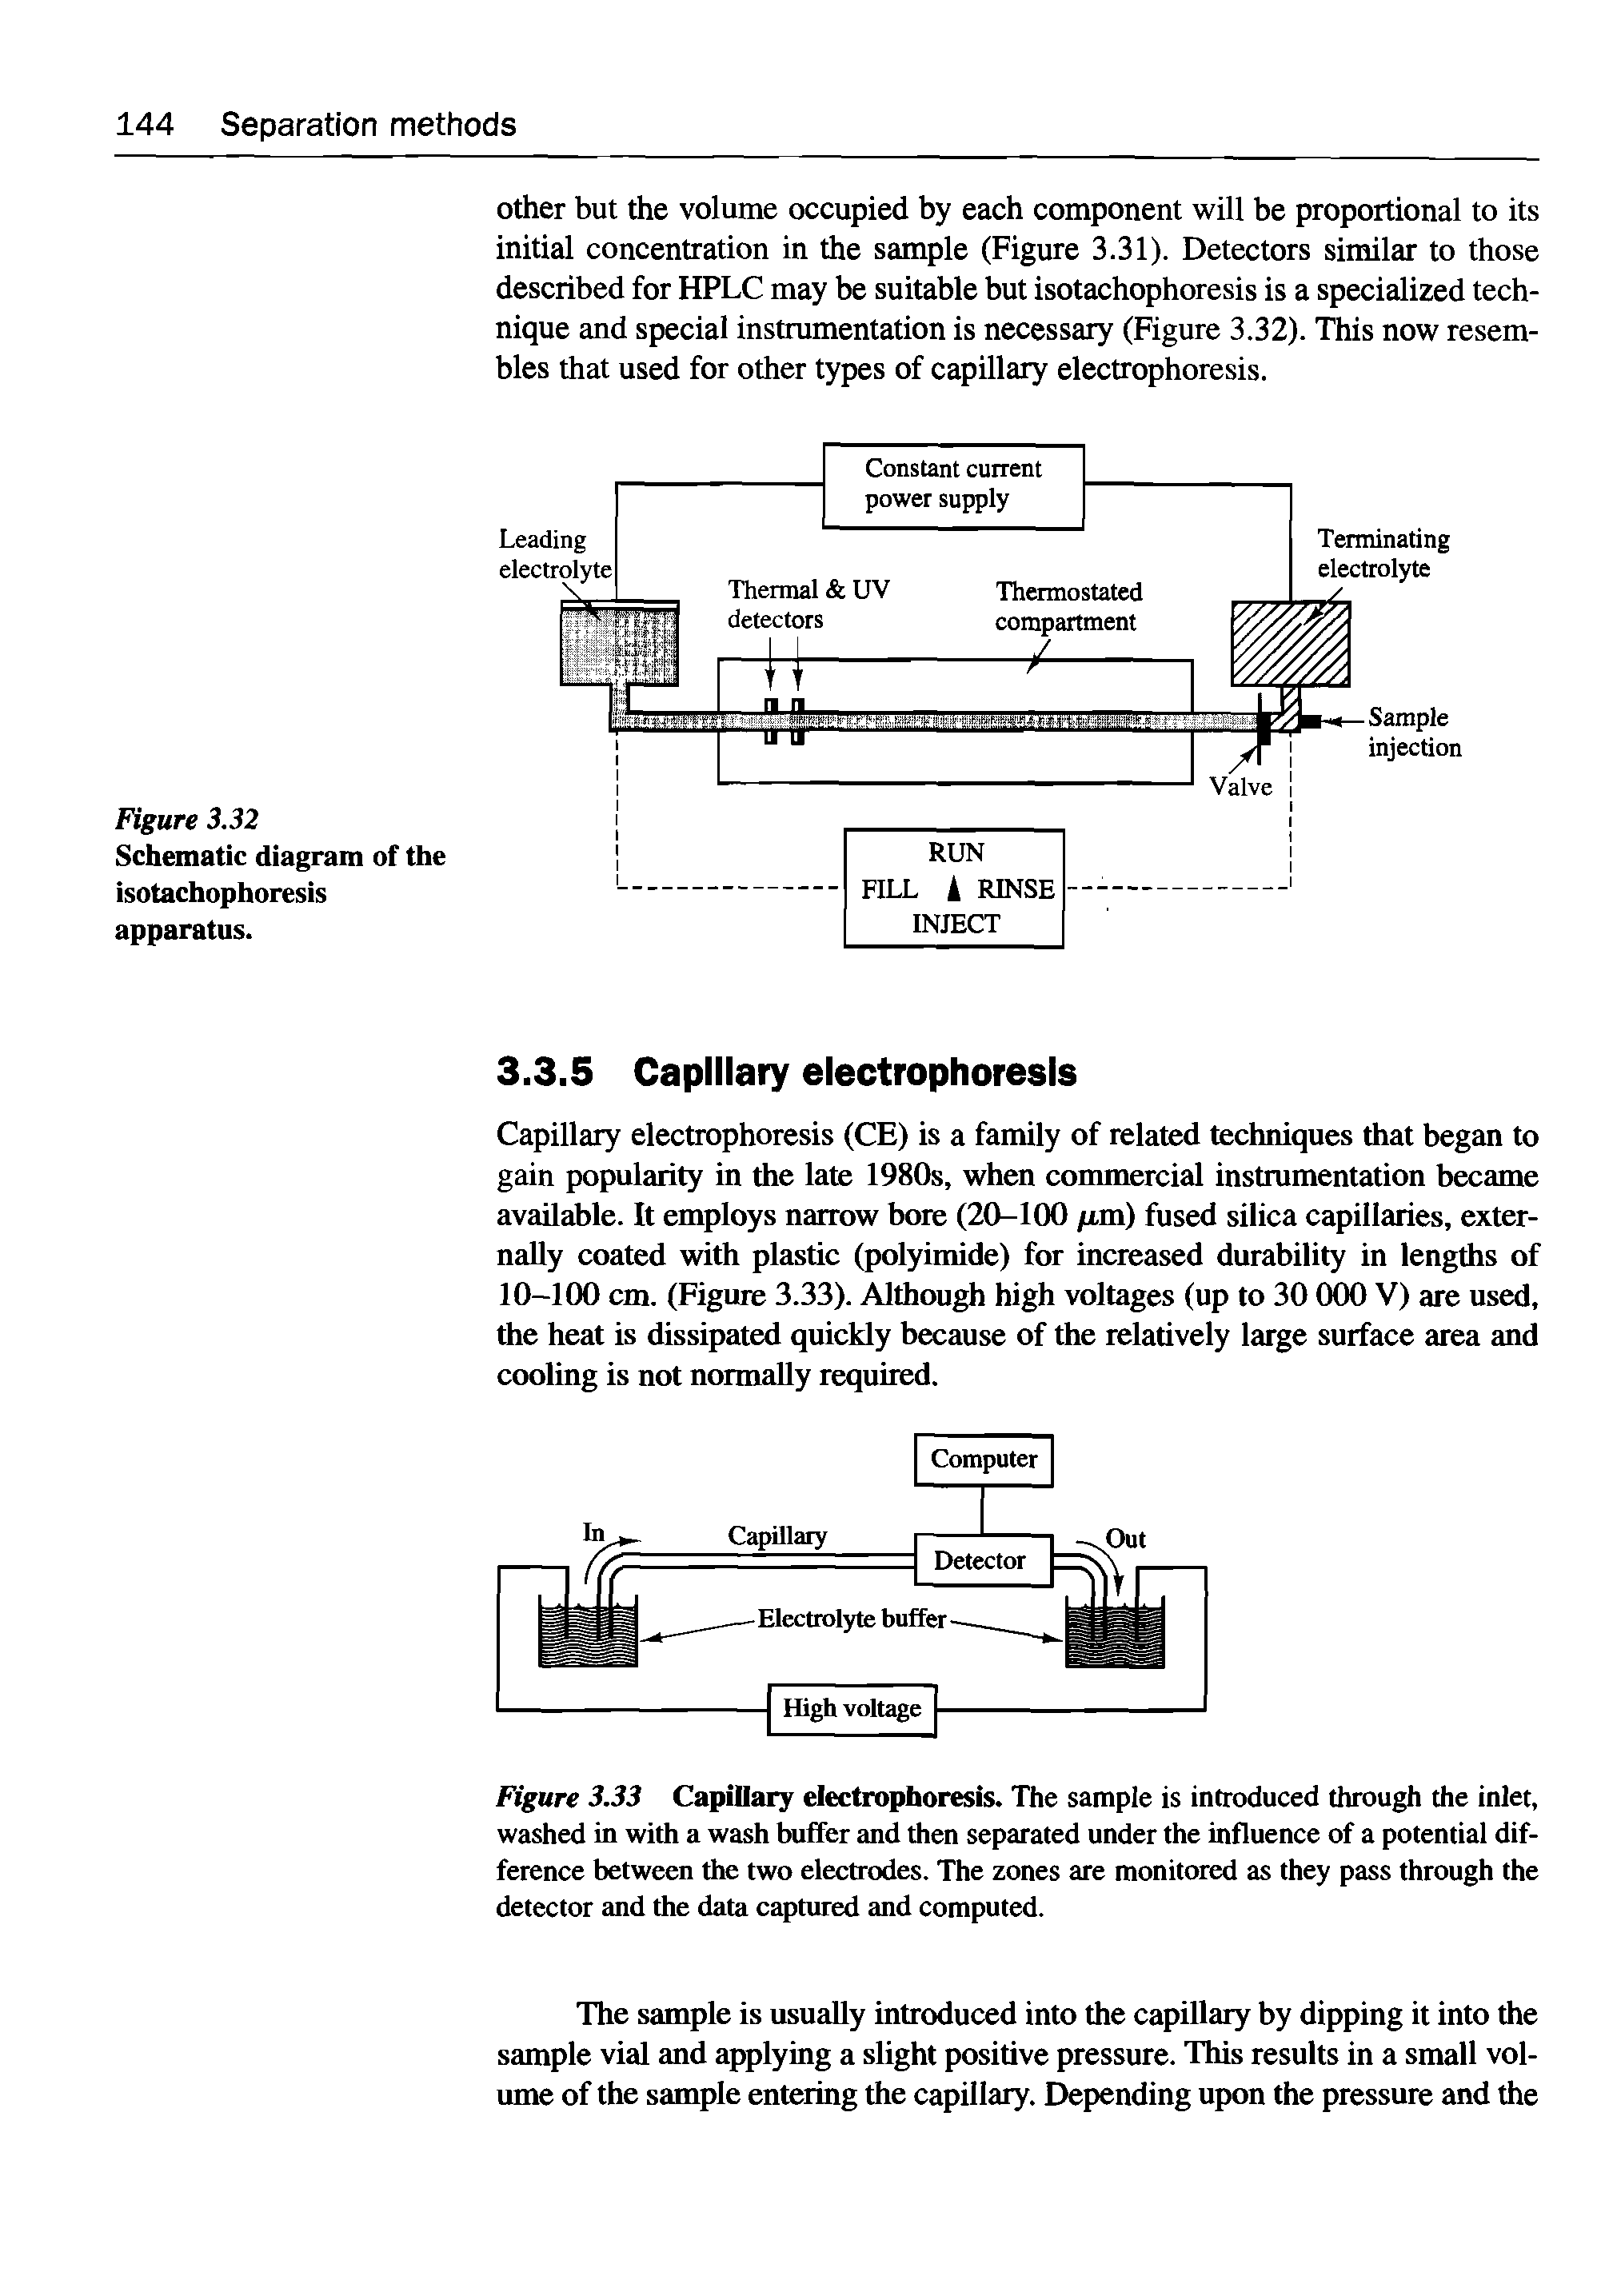 Figure 3.33 Capillary electrophoresis. The sample is introduced through the inlet, washed in with a wash buffer and then separated under the influence of a potential difference between the two electrodes. The zones are monitored as they pass through the detector and the data captured and computed.